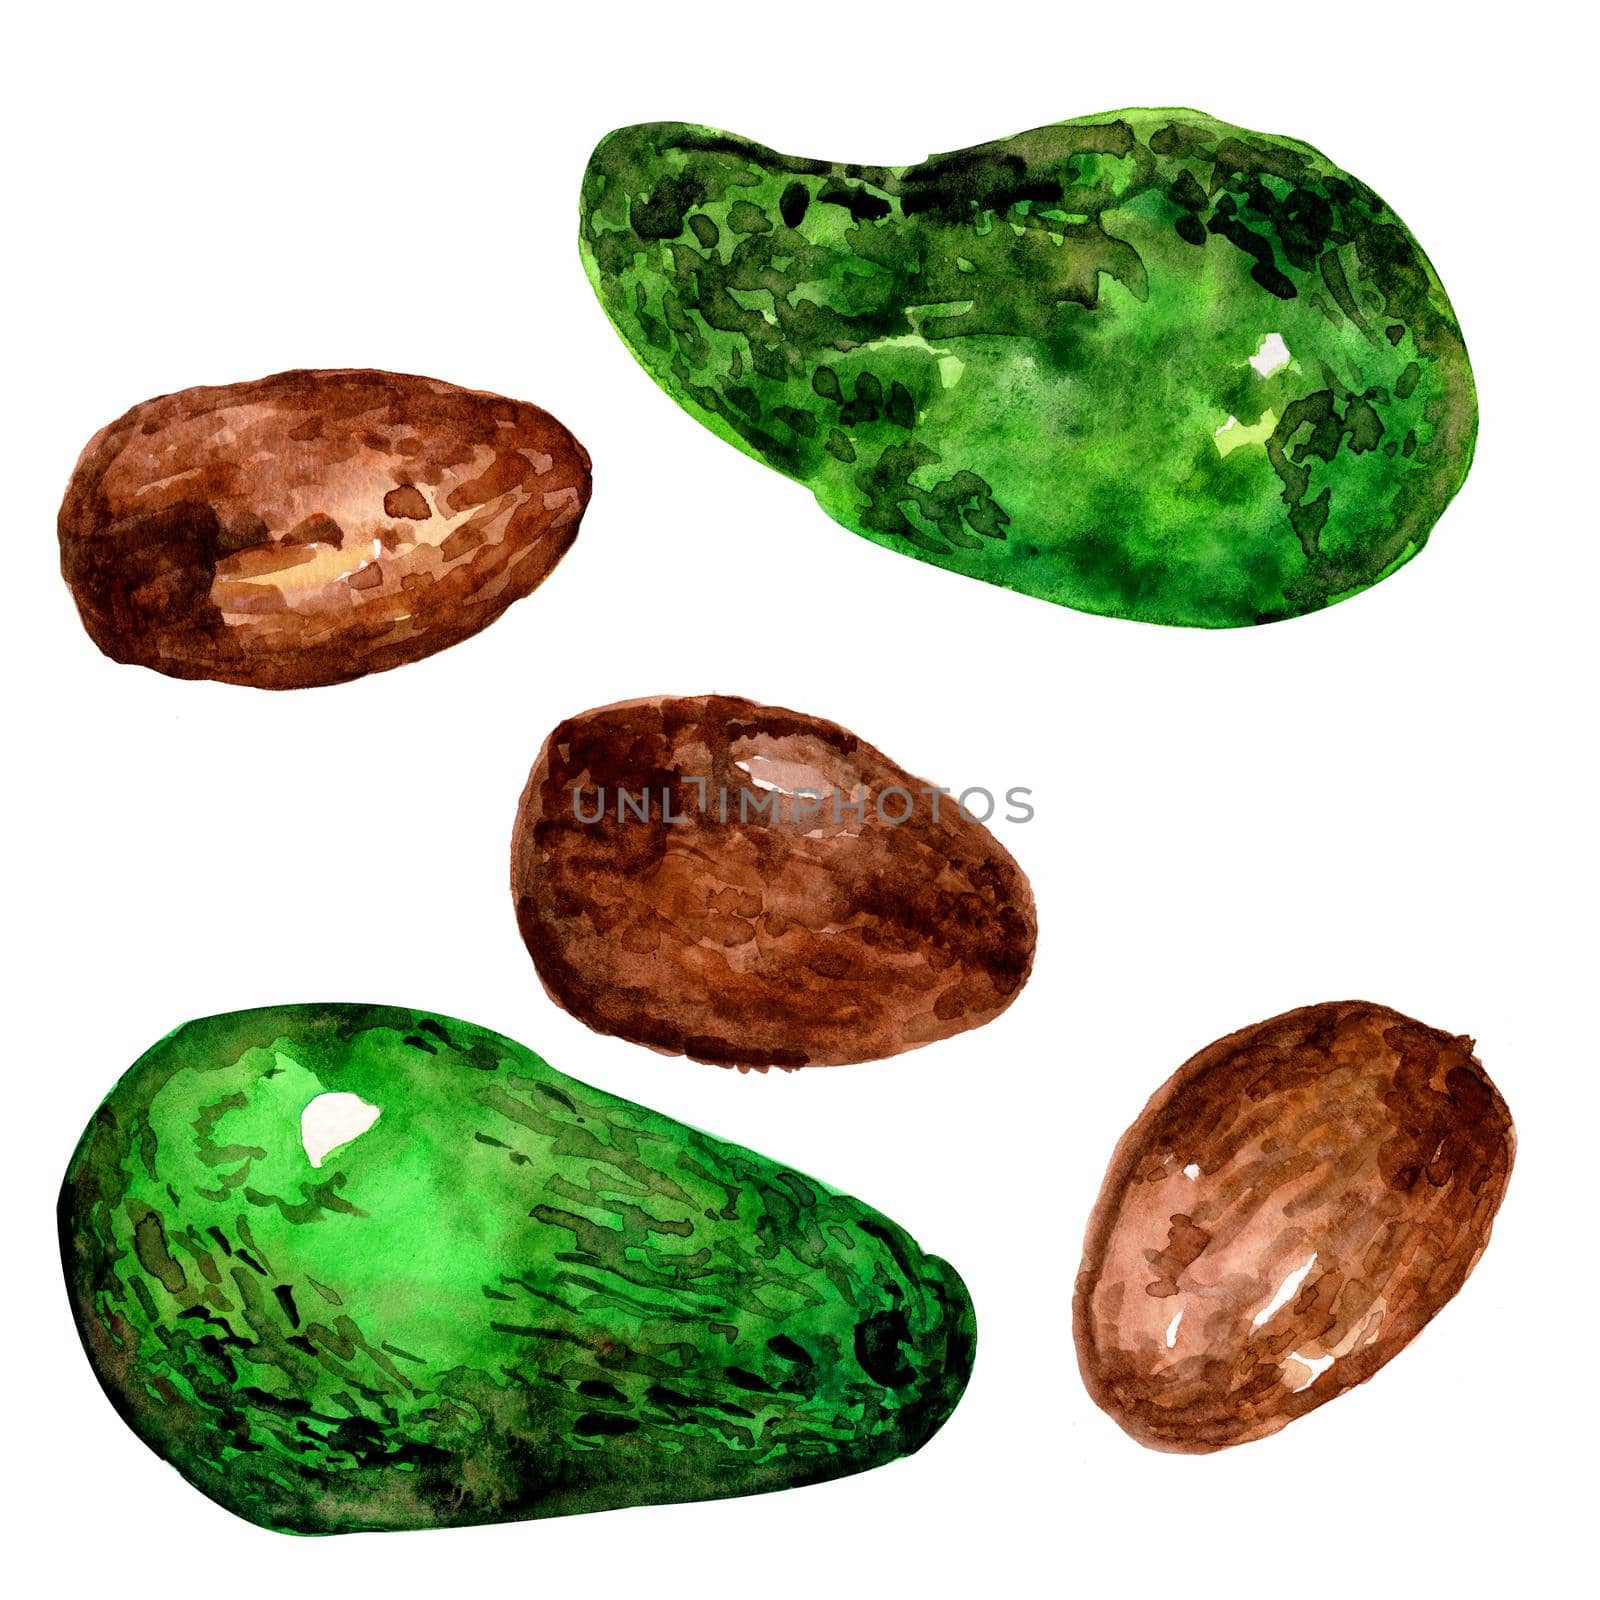 A set of green avocado with brown seeds. Isolated fruits on a white background.